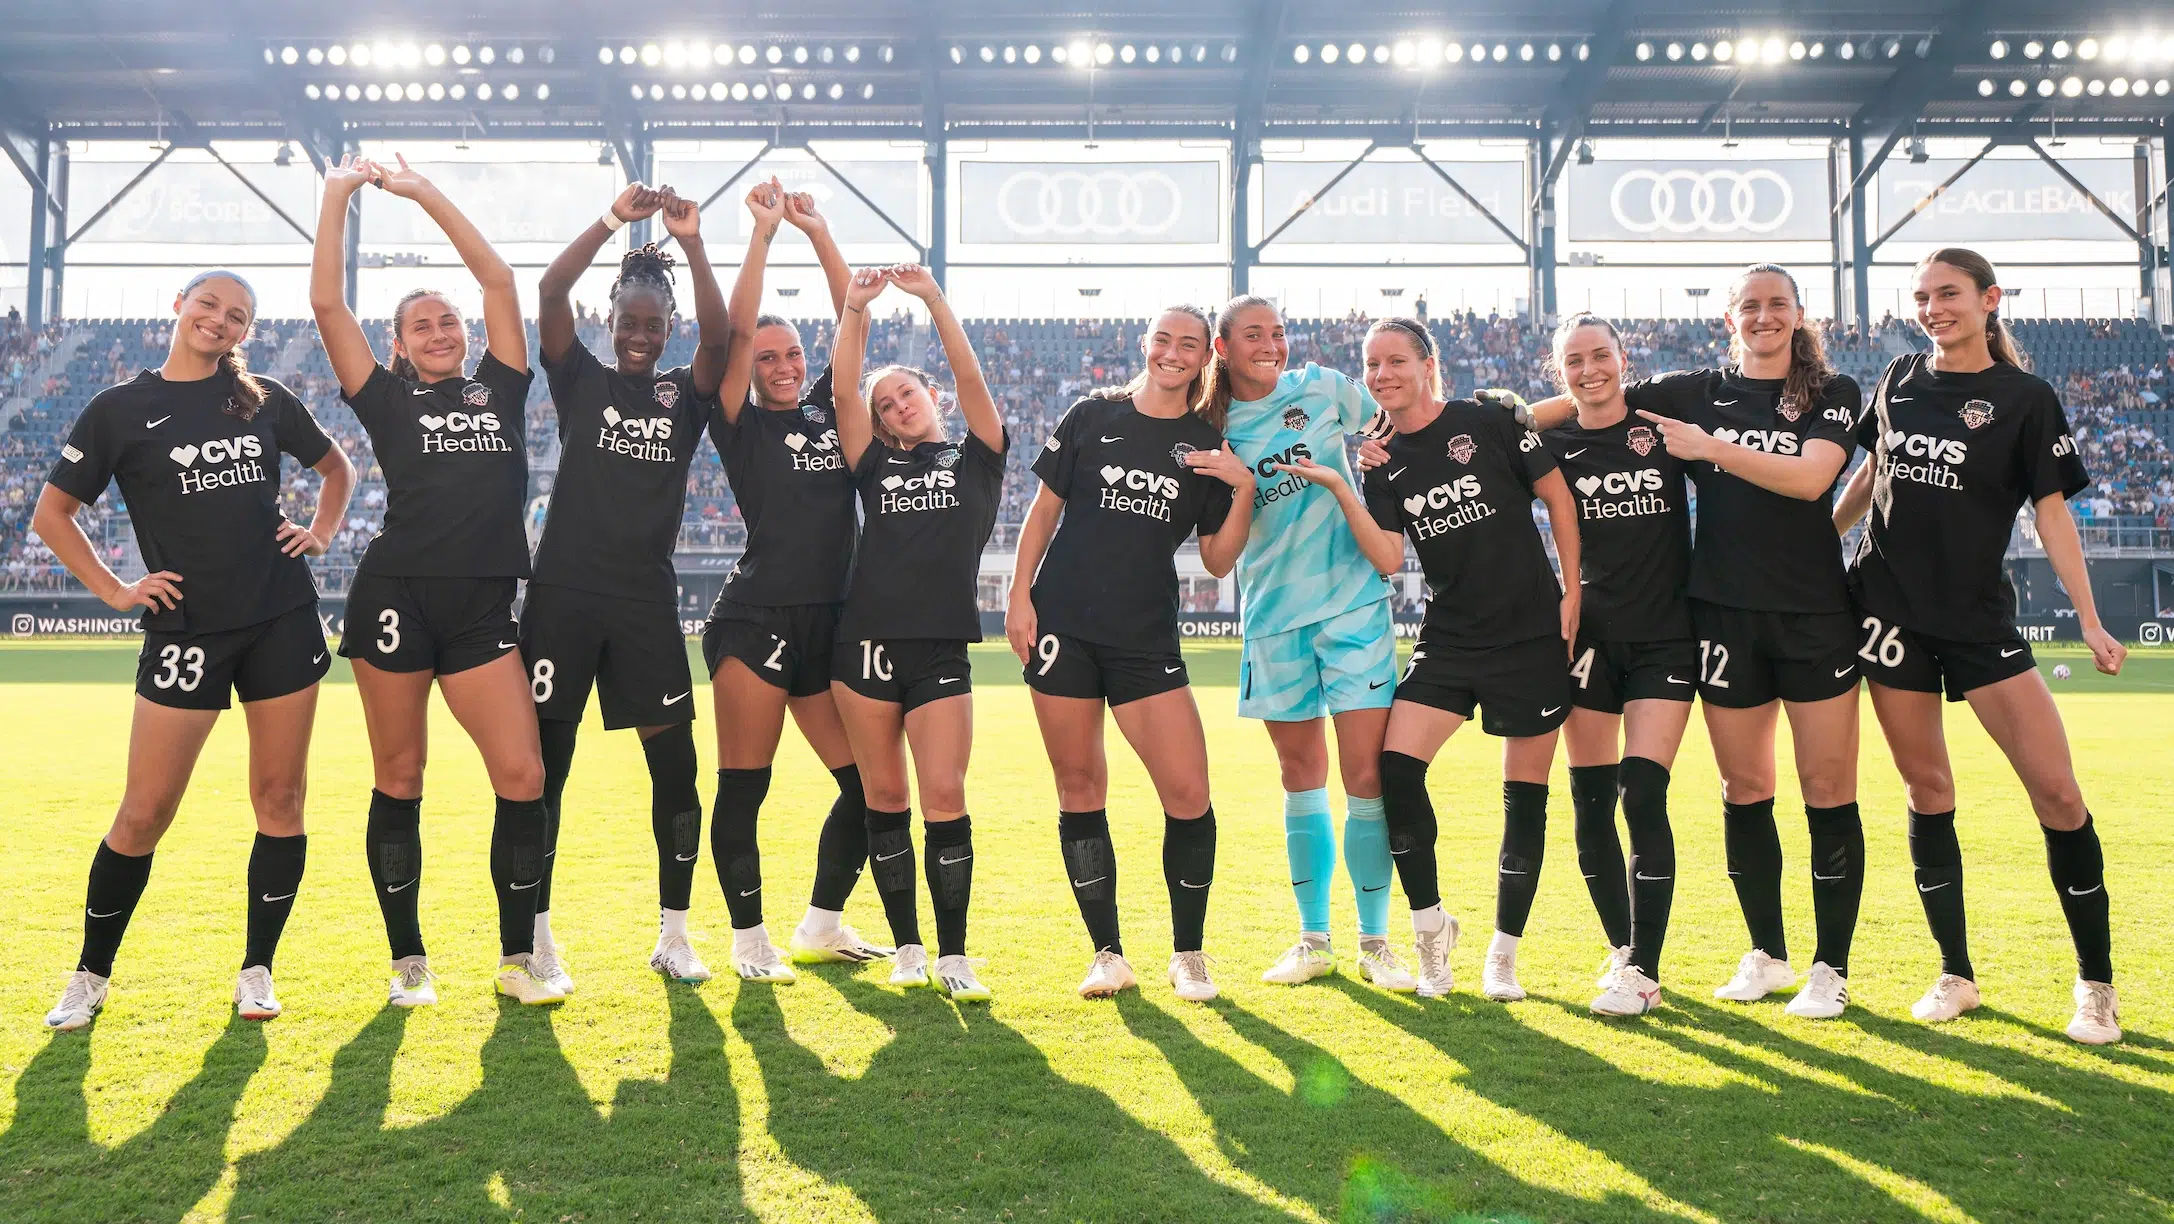 The starting eleven of the Washington Spirit in black kits pose for a photo.